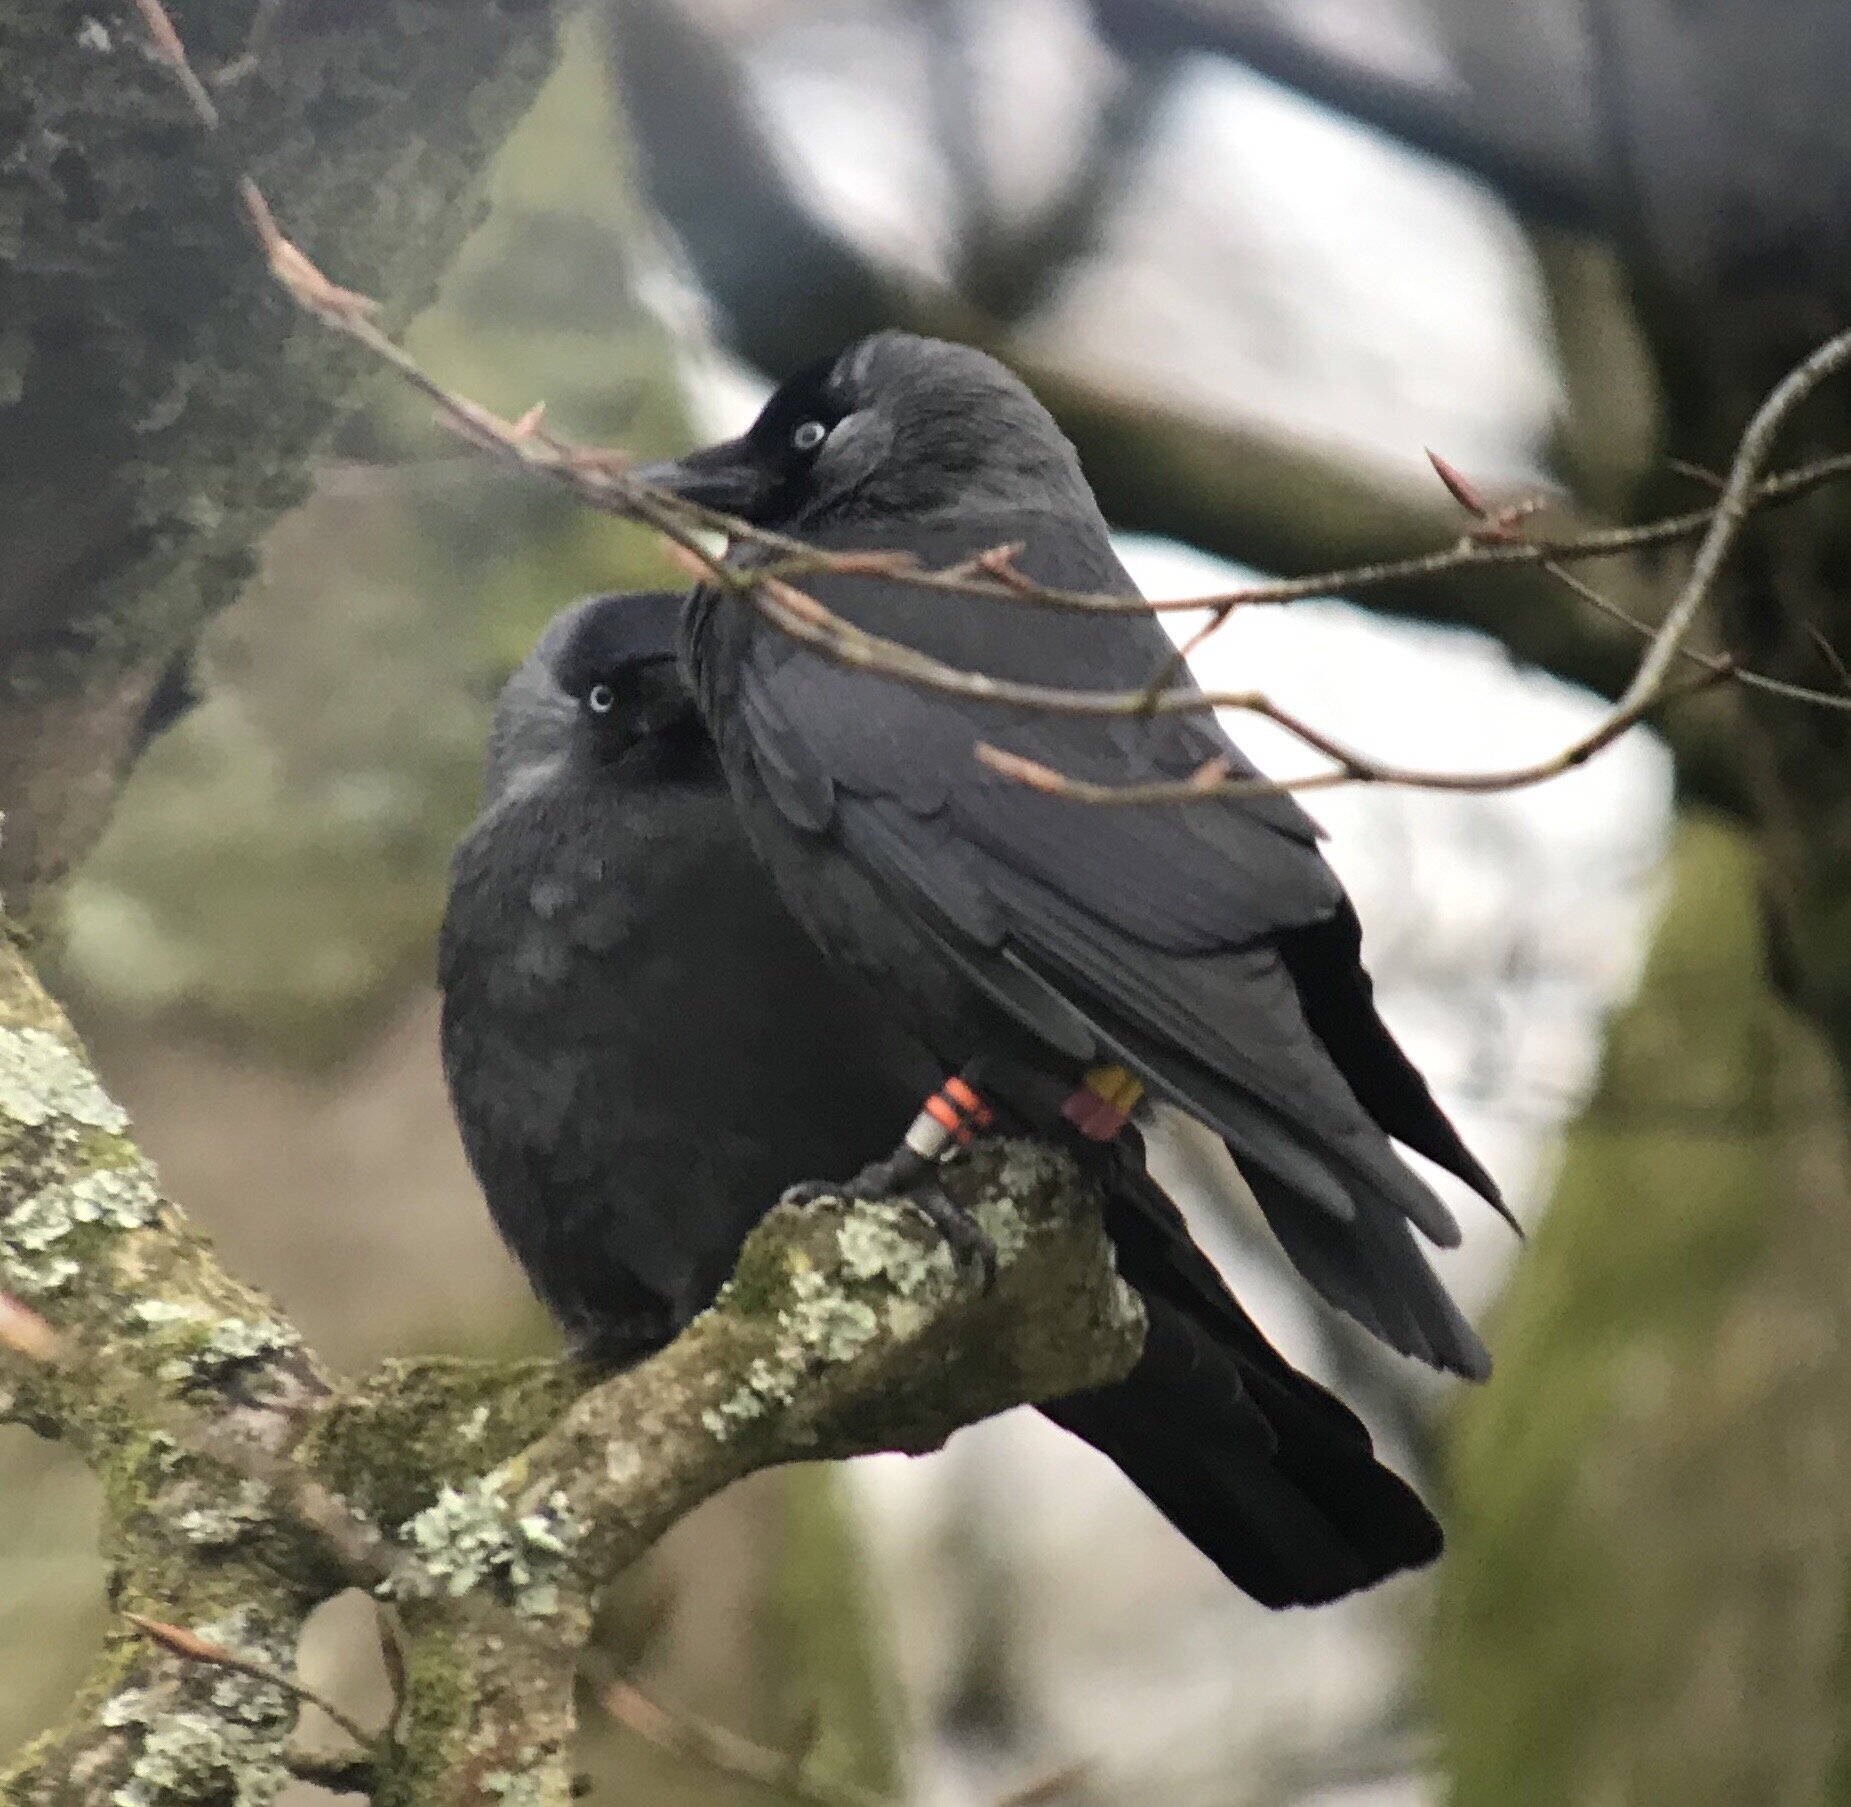 jackdaws dont console